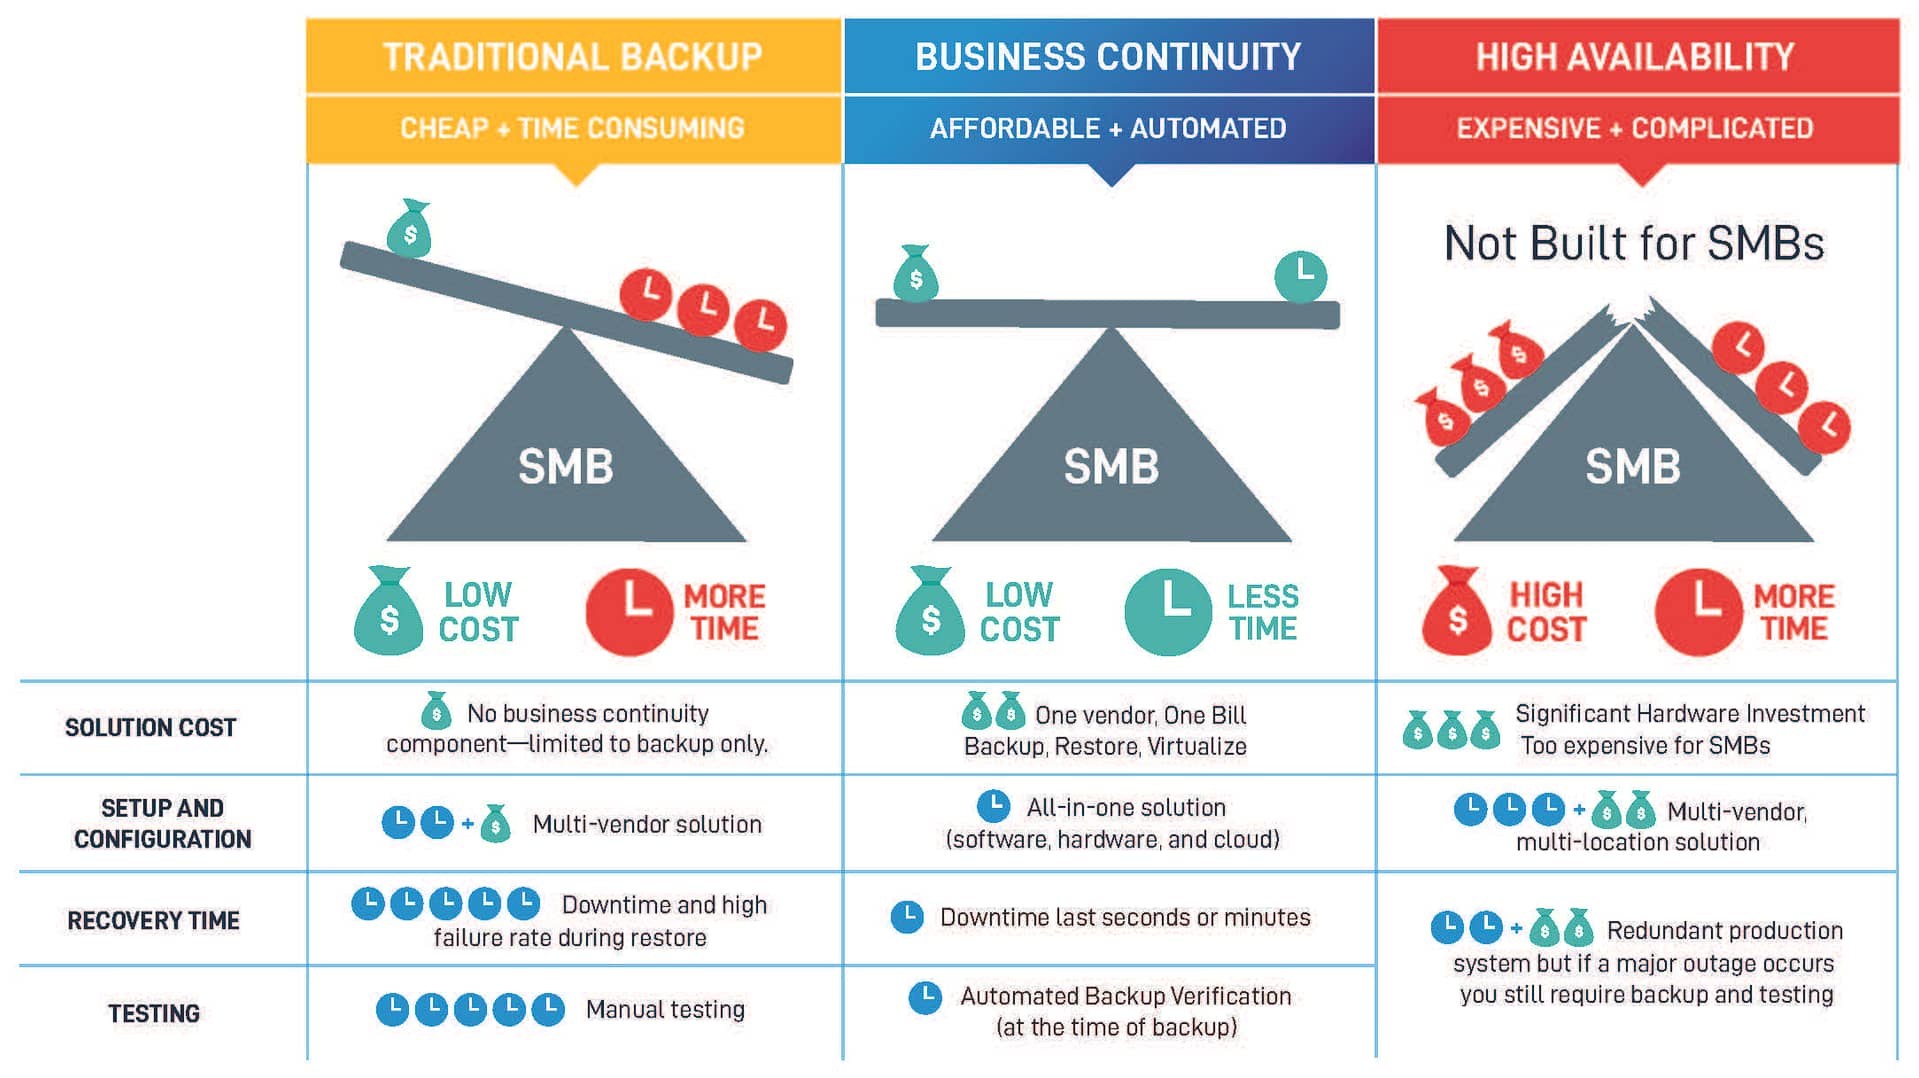 Traditional Backup vs Business Continuity